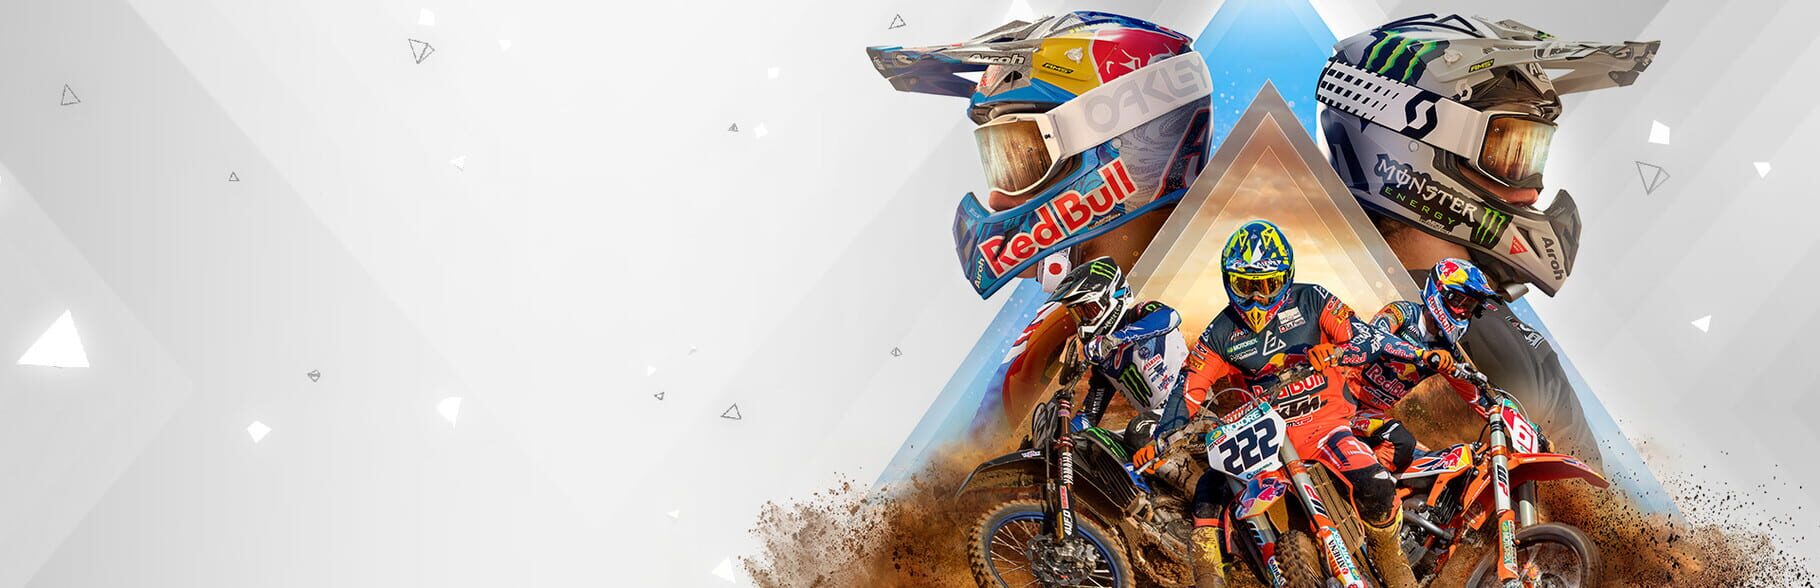 MXGP 2019: The Official Motocross Videogame Image